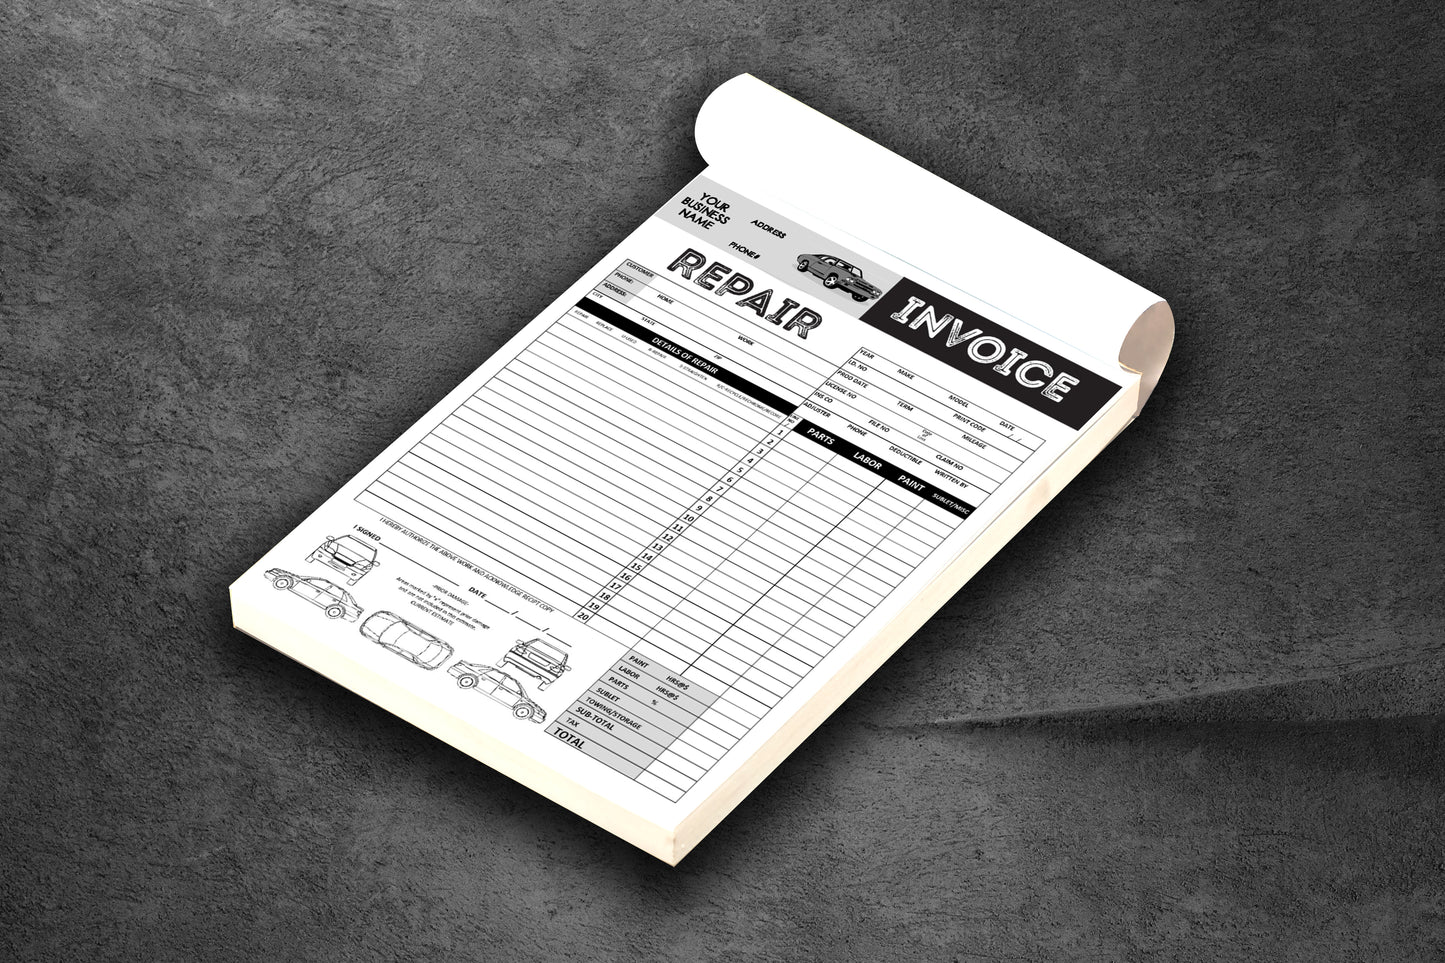 4 books (200 sets) Carbonless Copy Forms- 5.5"x8.5" (50 sets per book -1 white sheet and 1 yellow sheet)